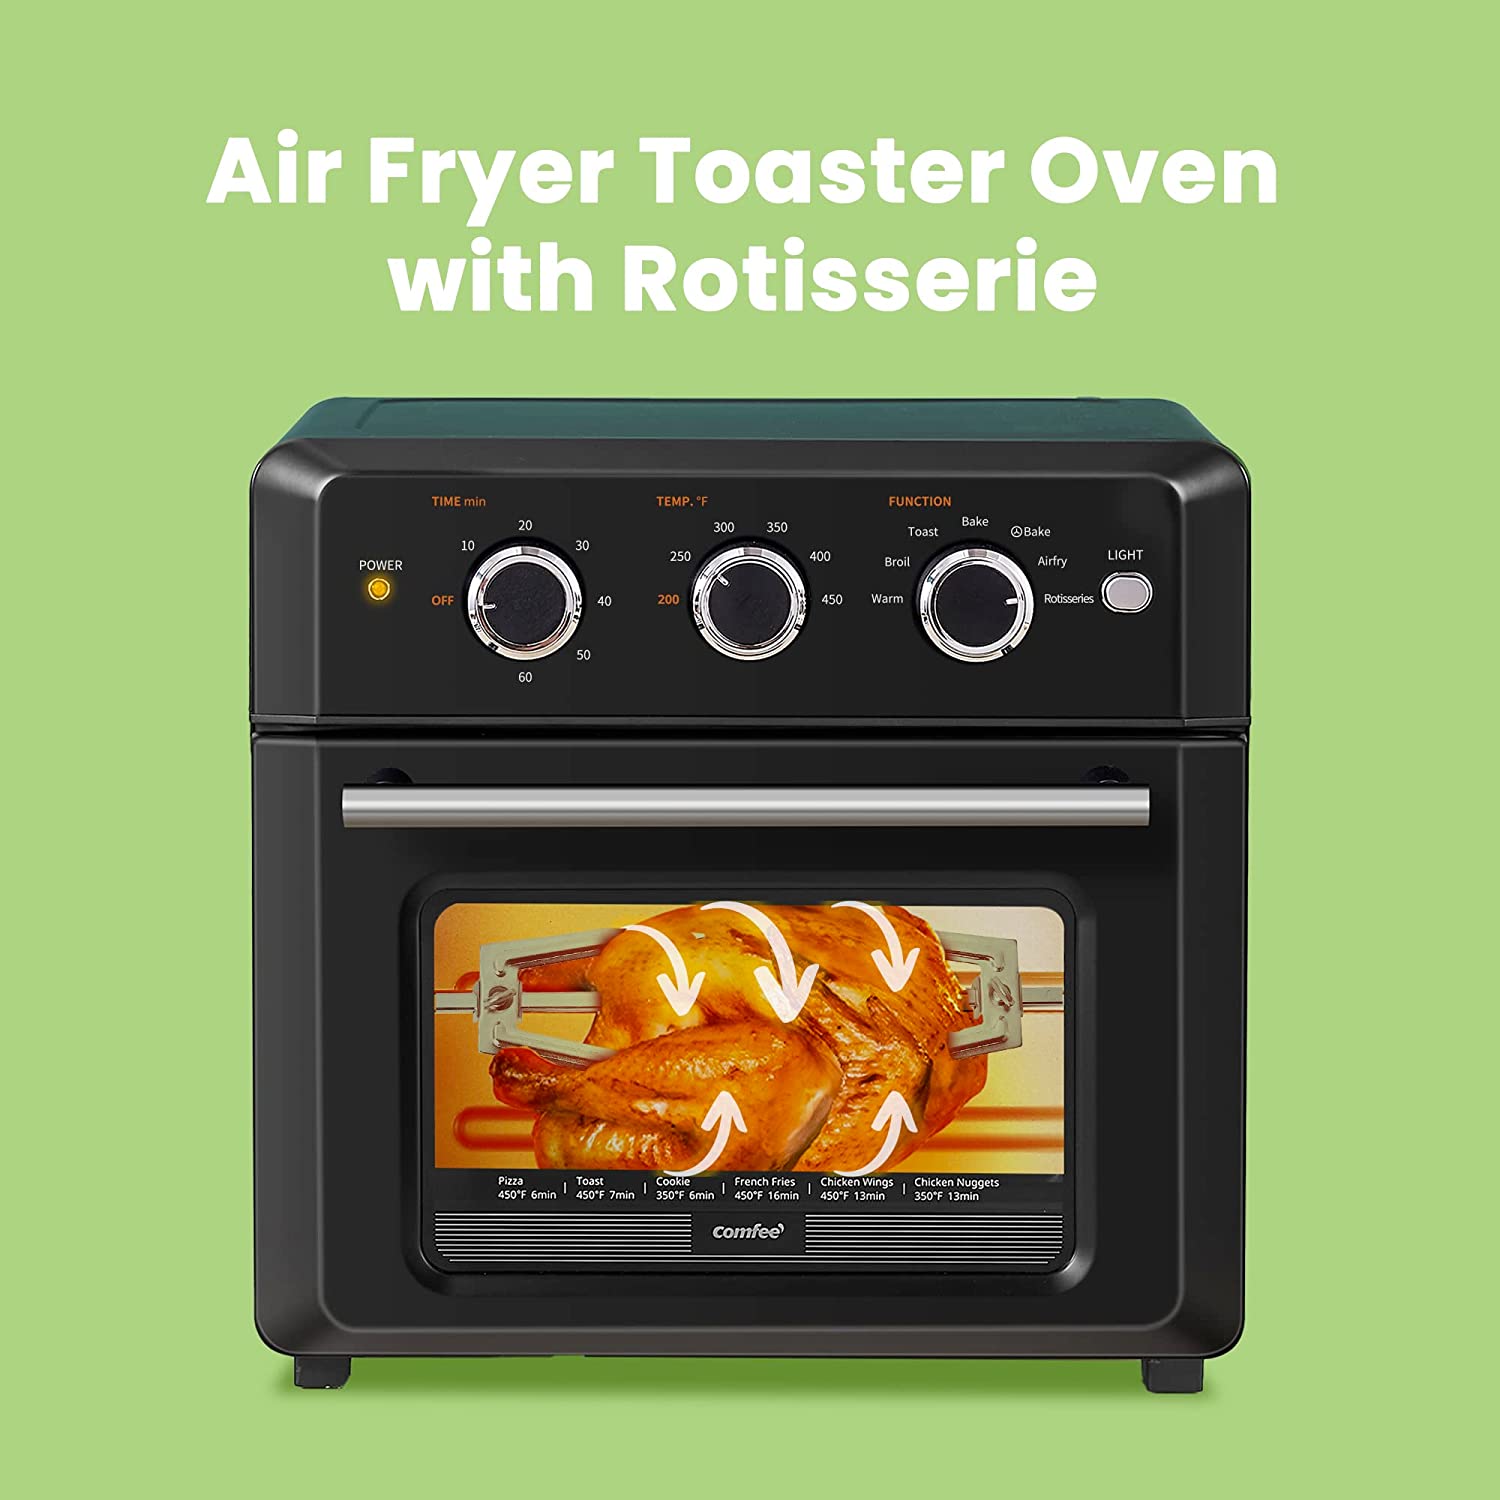 Comfee' Retro Air Fryer Toaster Oven - Toasters & Toaster Ovens, Facebook  Marketplace